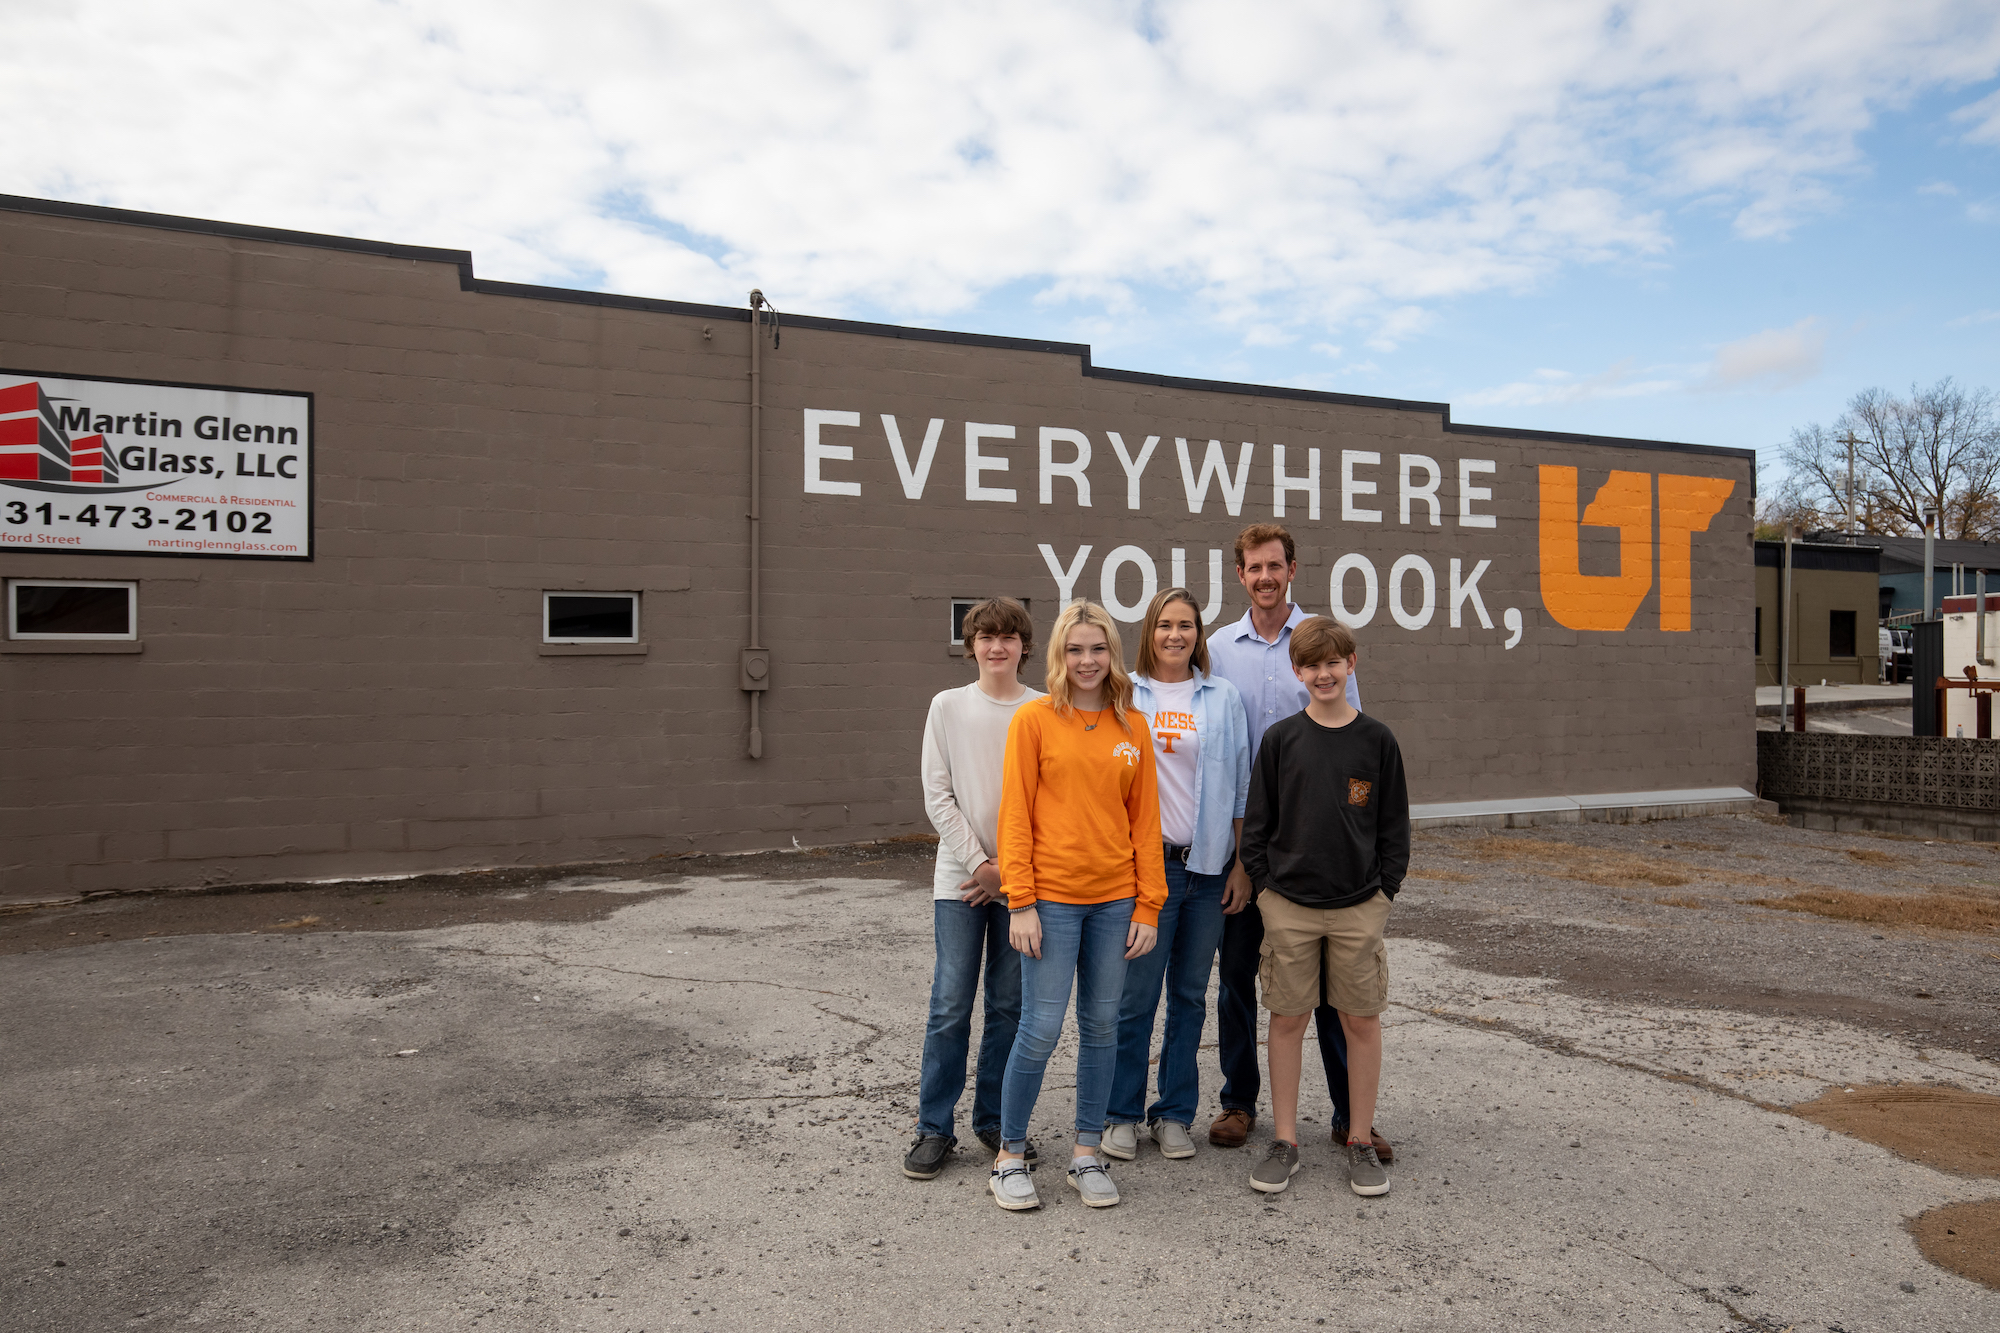 The Randolph family standing in front of the UT mural in McMinnville